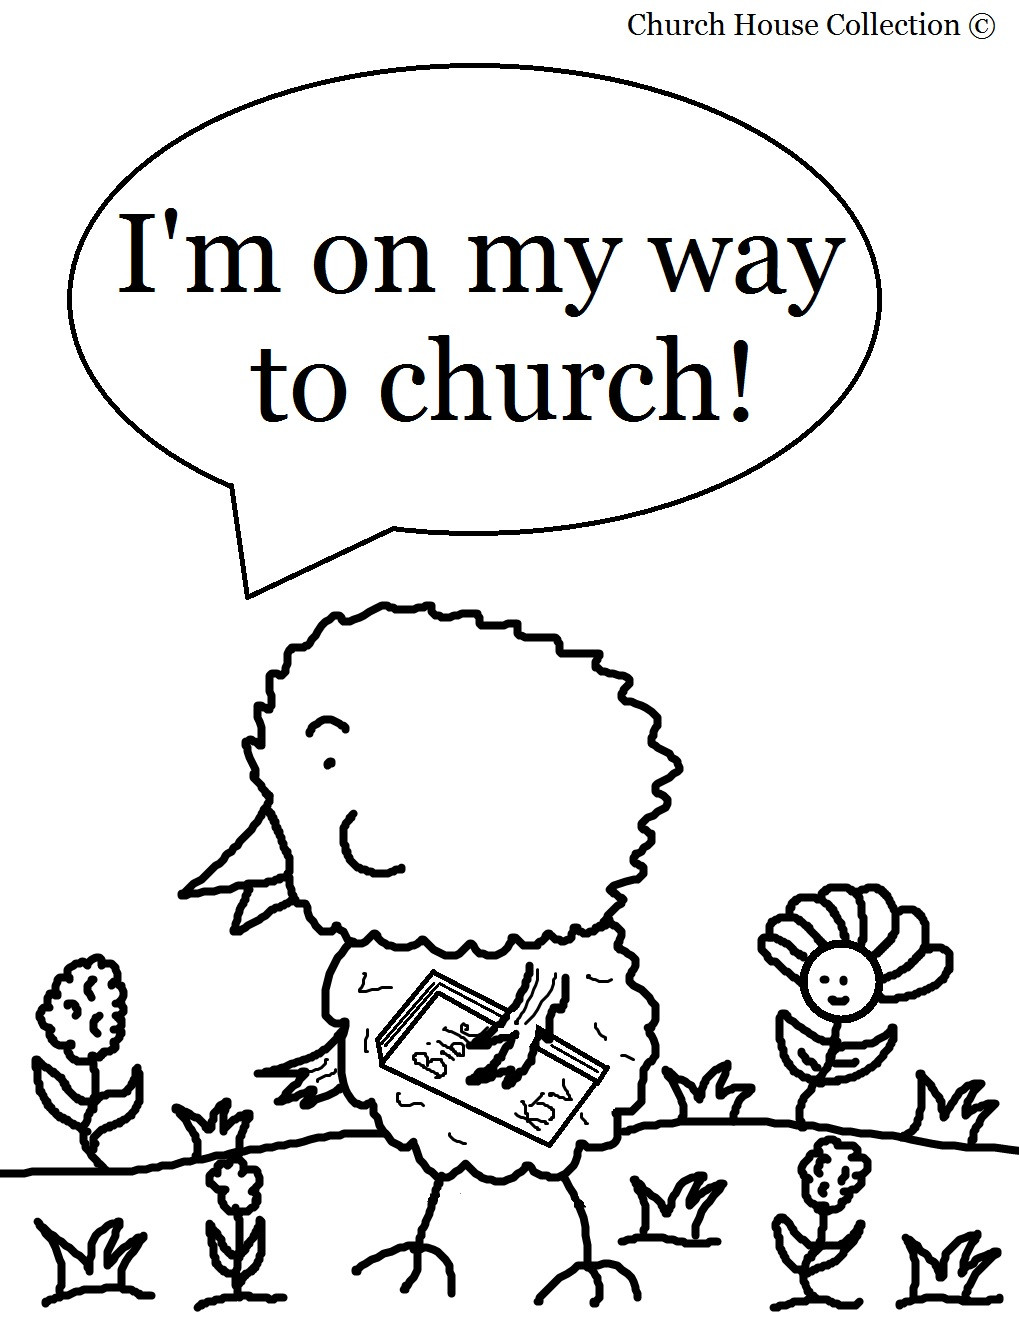 Sunday School Coloring Pages Kids
 Church House Collection Blog Easter Chick Coloring Page For Sunday School Kids "Chick His